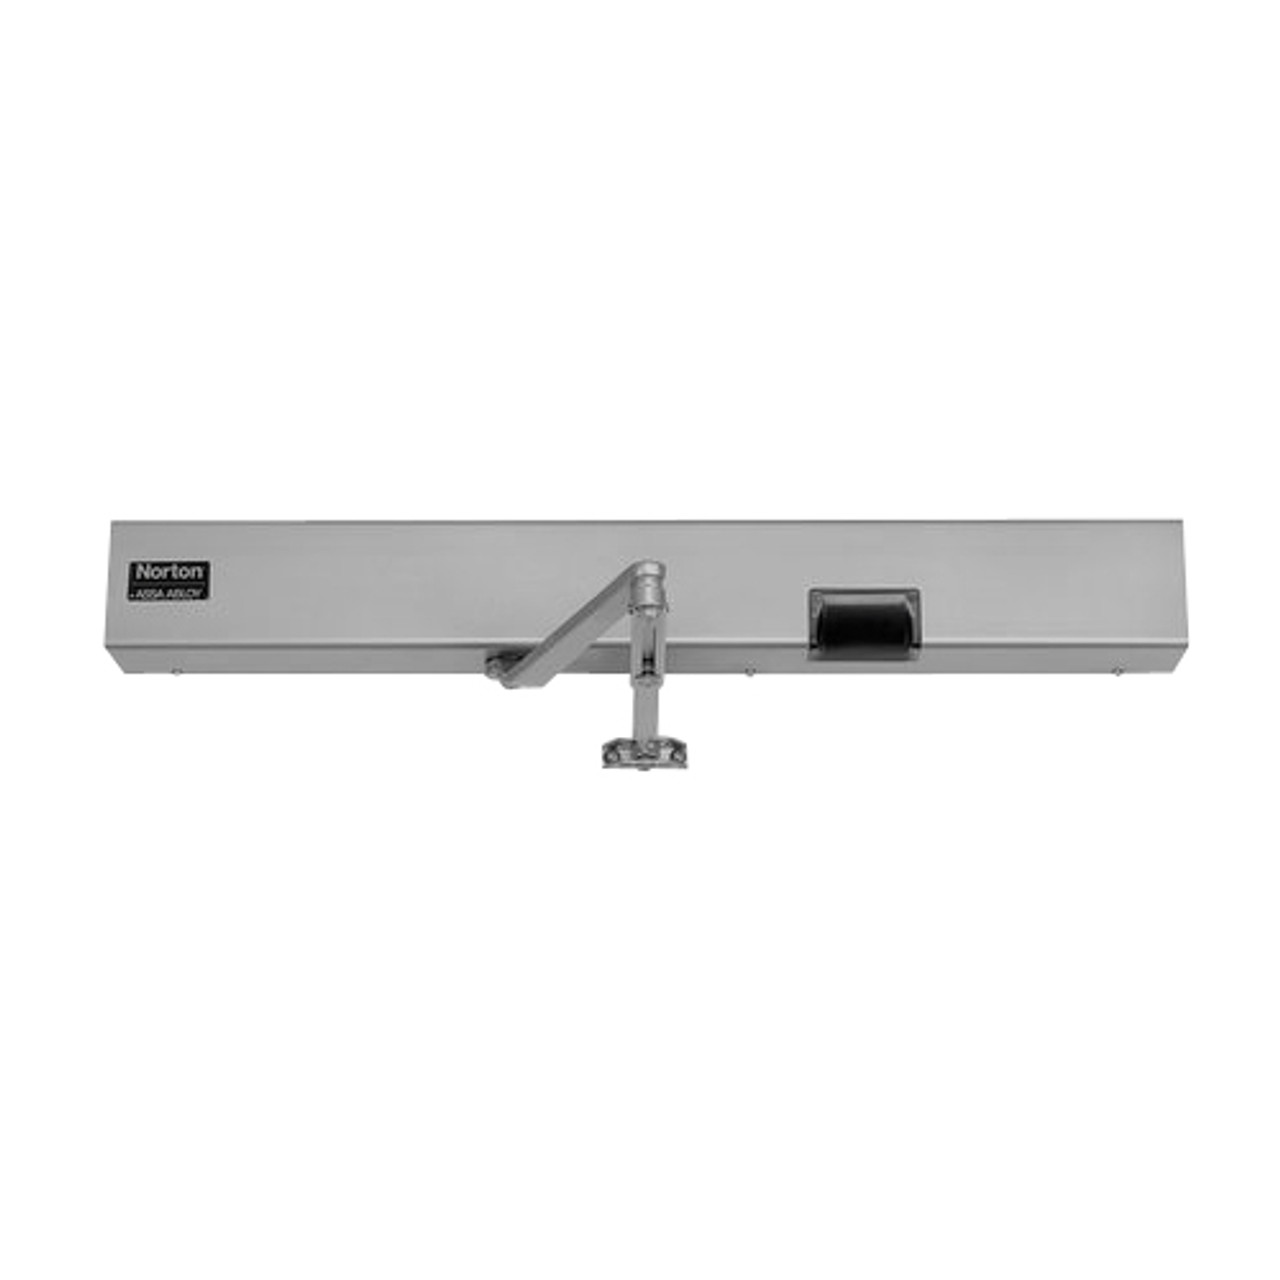 7135SZ-LH-120VAC-689 Norton 7100SZ Series Safe Zone Multi-Point Closer/Holder with Motion Sensor and Push Side Double Lever 13-1/2 inch Main Arm in Aluminum Finish